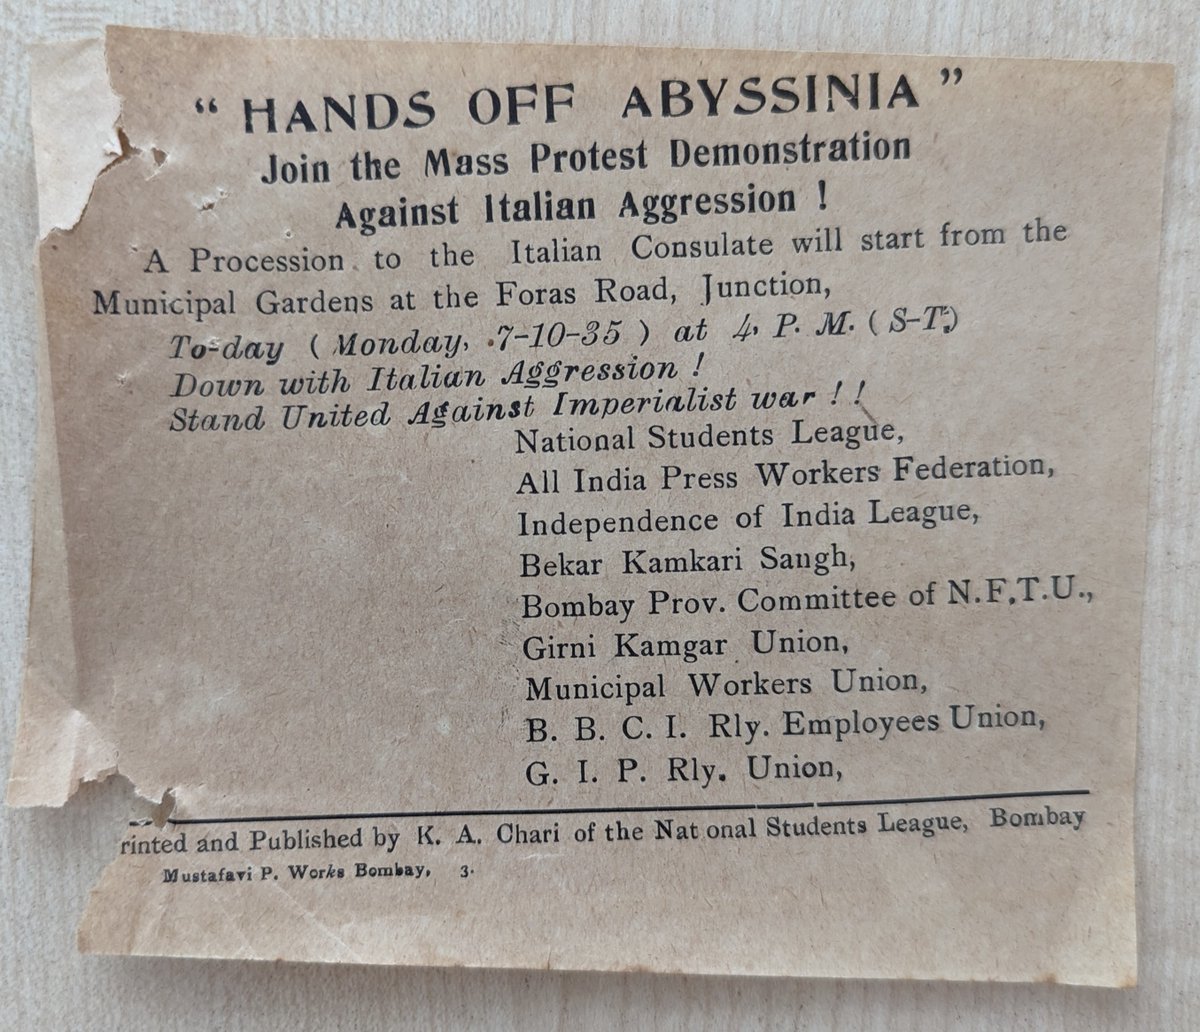 A Bombay protest against Mussolini's fascist aggression (the Italian Invasion or the Second Italo-Ethiopian War).

'HANDS OFF ABYSSINIA'

#materialculture #archive #echoes #anticolonialism #imperialism #fascism #freespeech #protests #axispowers #WW2